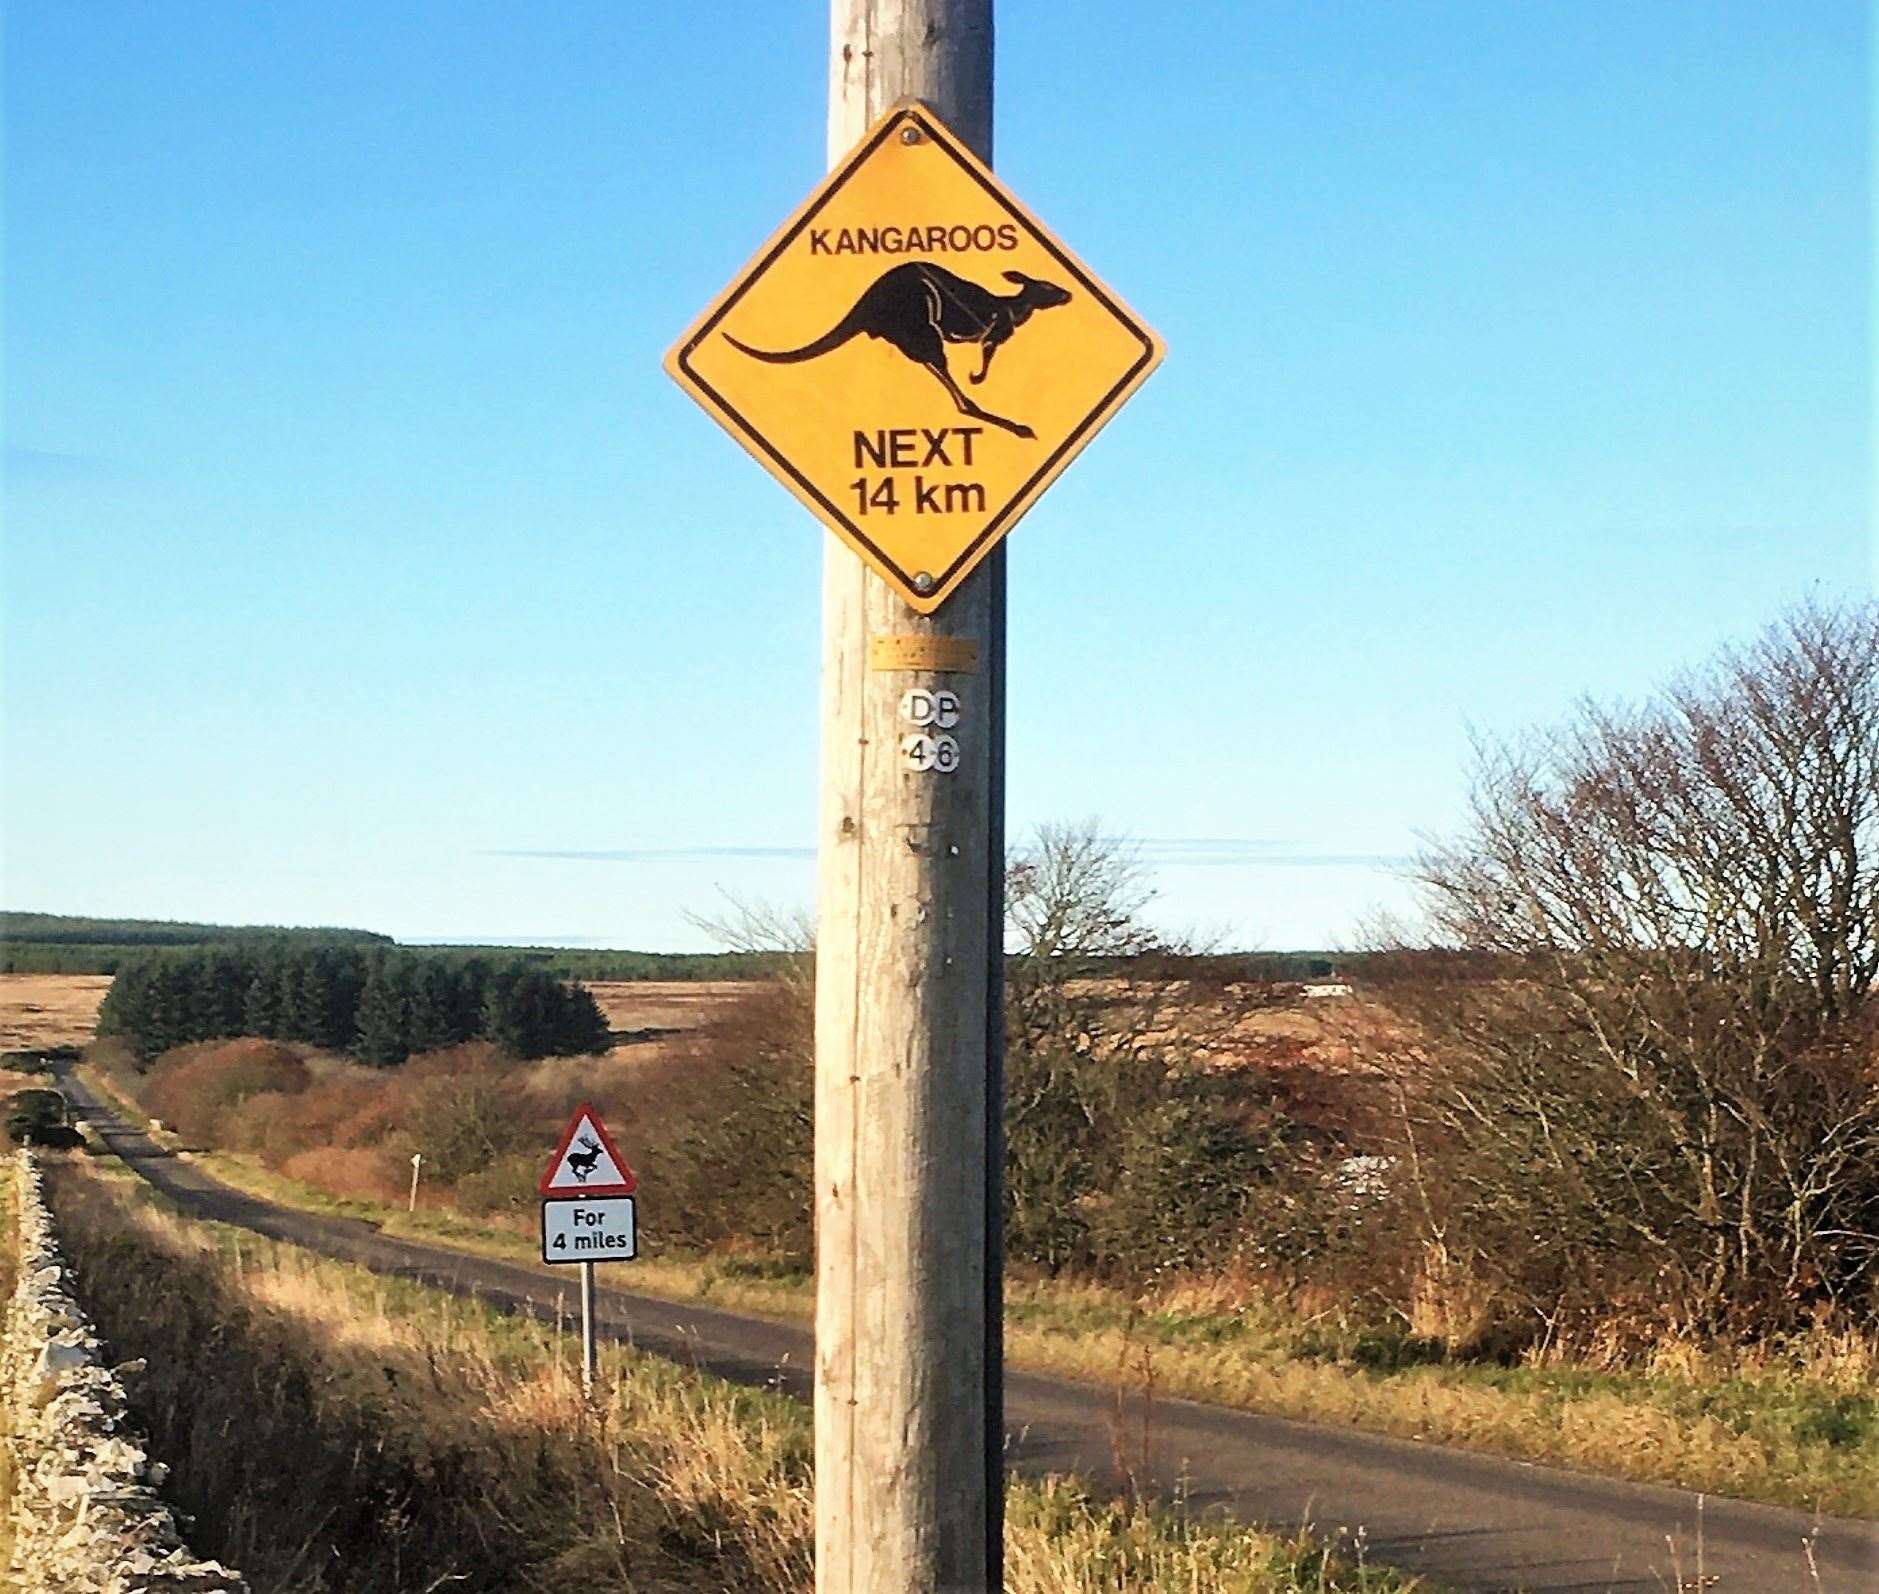 Lynn Ellis from Thrumster sent in this picture of a rather unusual road sign that's appeared on the Tannach road.